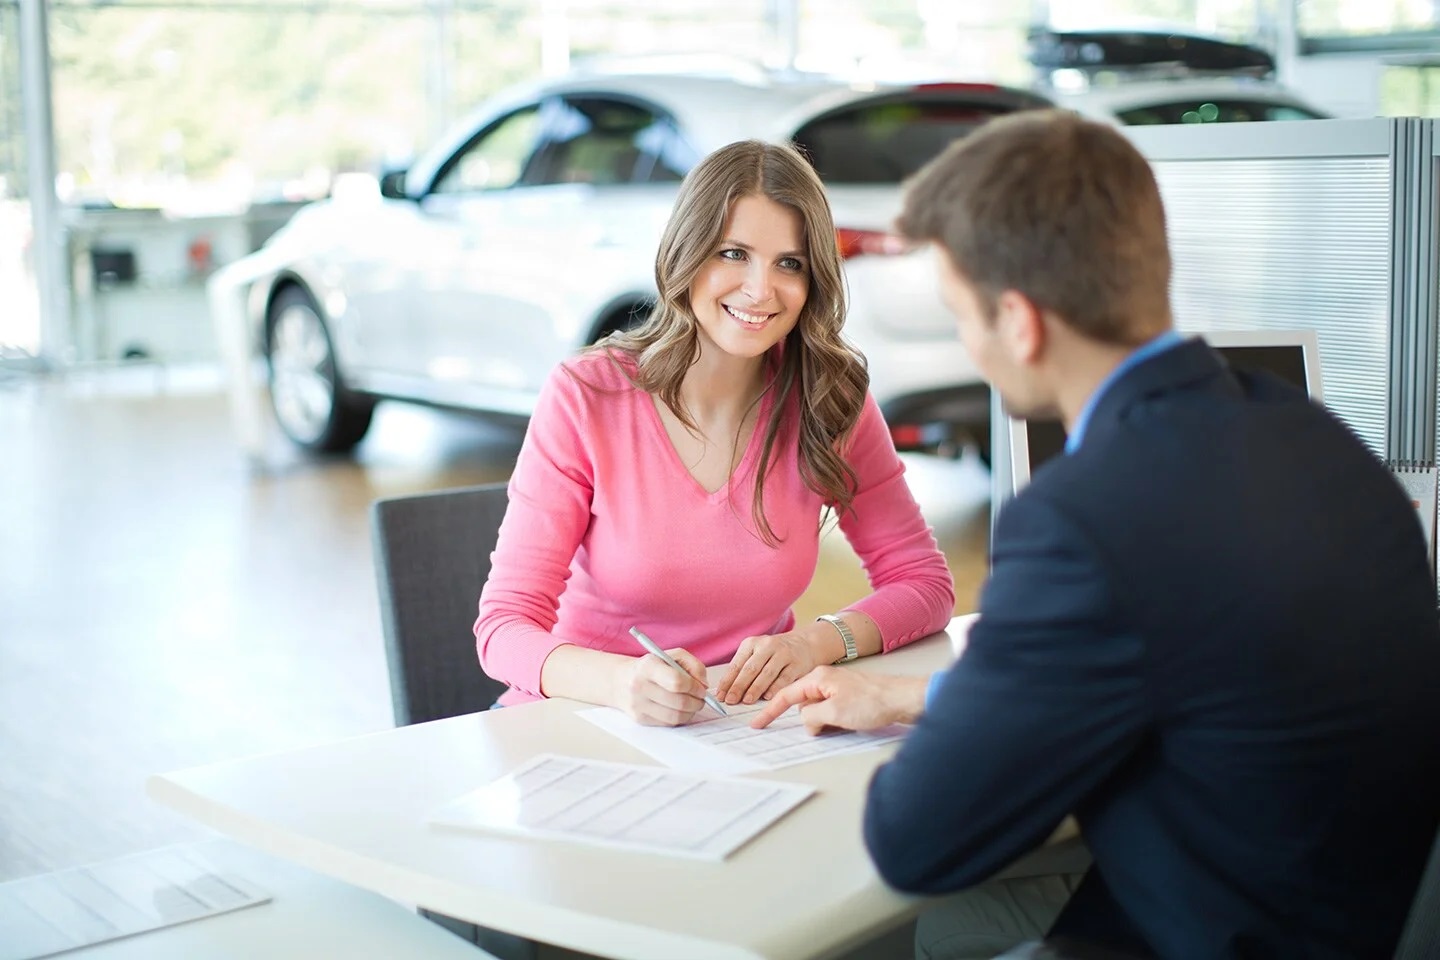 When to pay for car repairs with a personal loan (and when not to